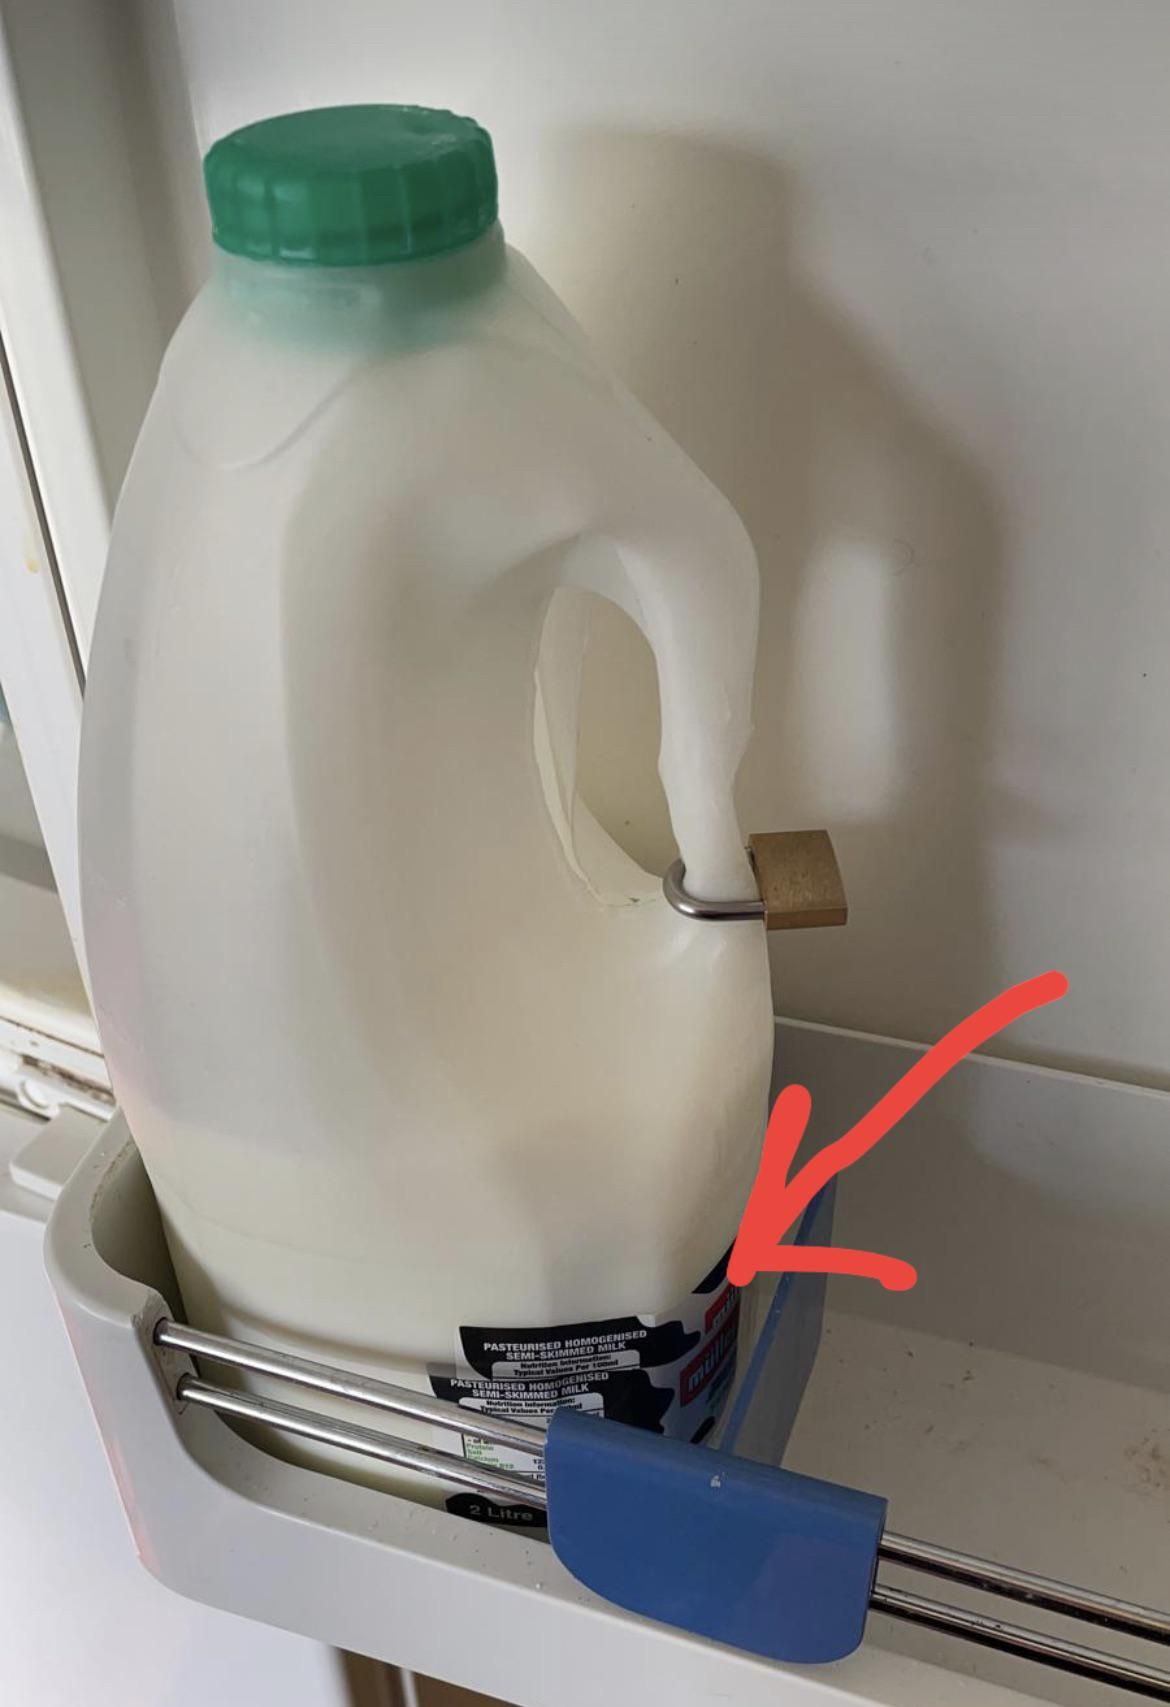 My flat mate has taken the security of the milk in next level. He cut one milk bottle into half and put on top of the new one and lock it so nobody can try to steal milk from him.